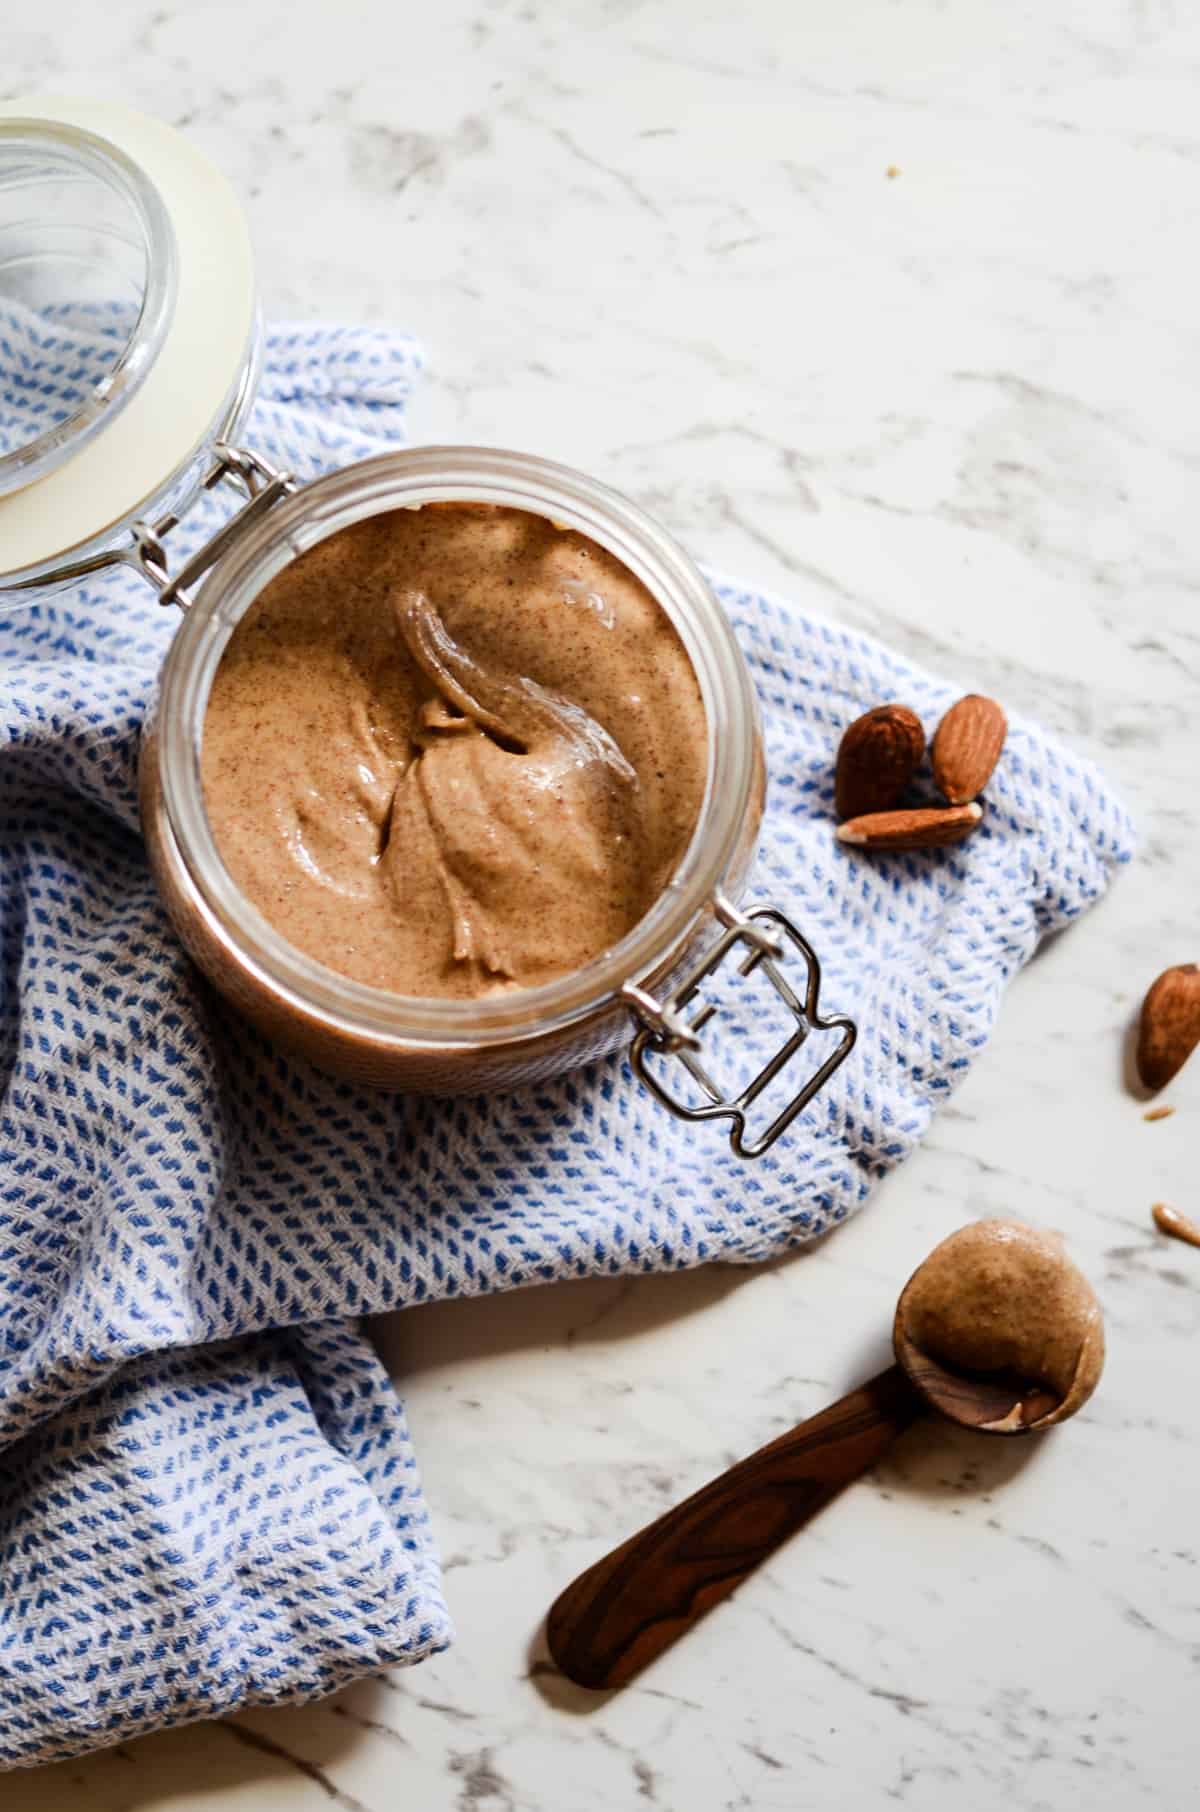 Homemade almond butter in a clasp jar.